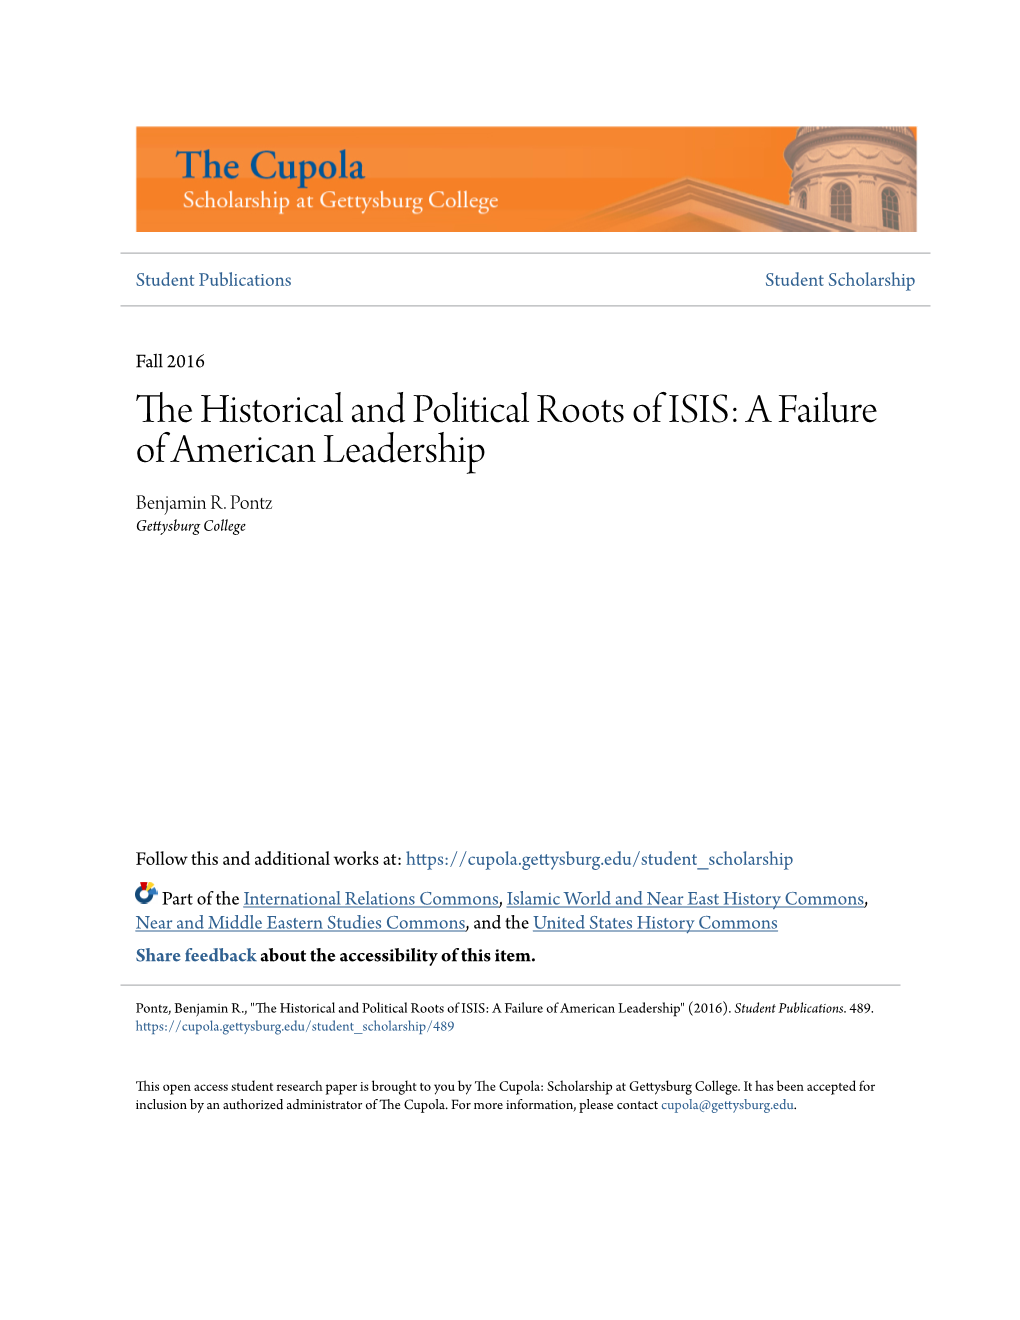 The Historical and Political Roots of ISIS: a Failure of American Leadership